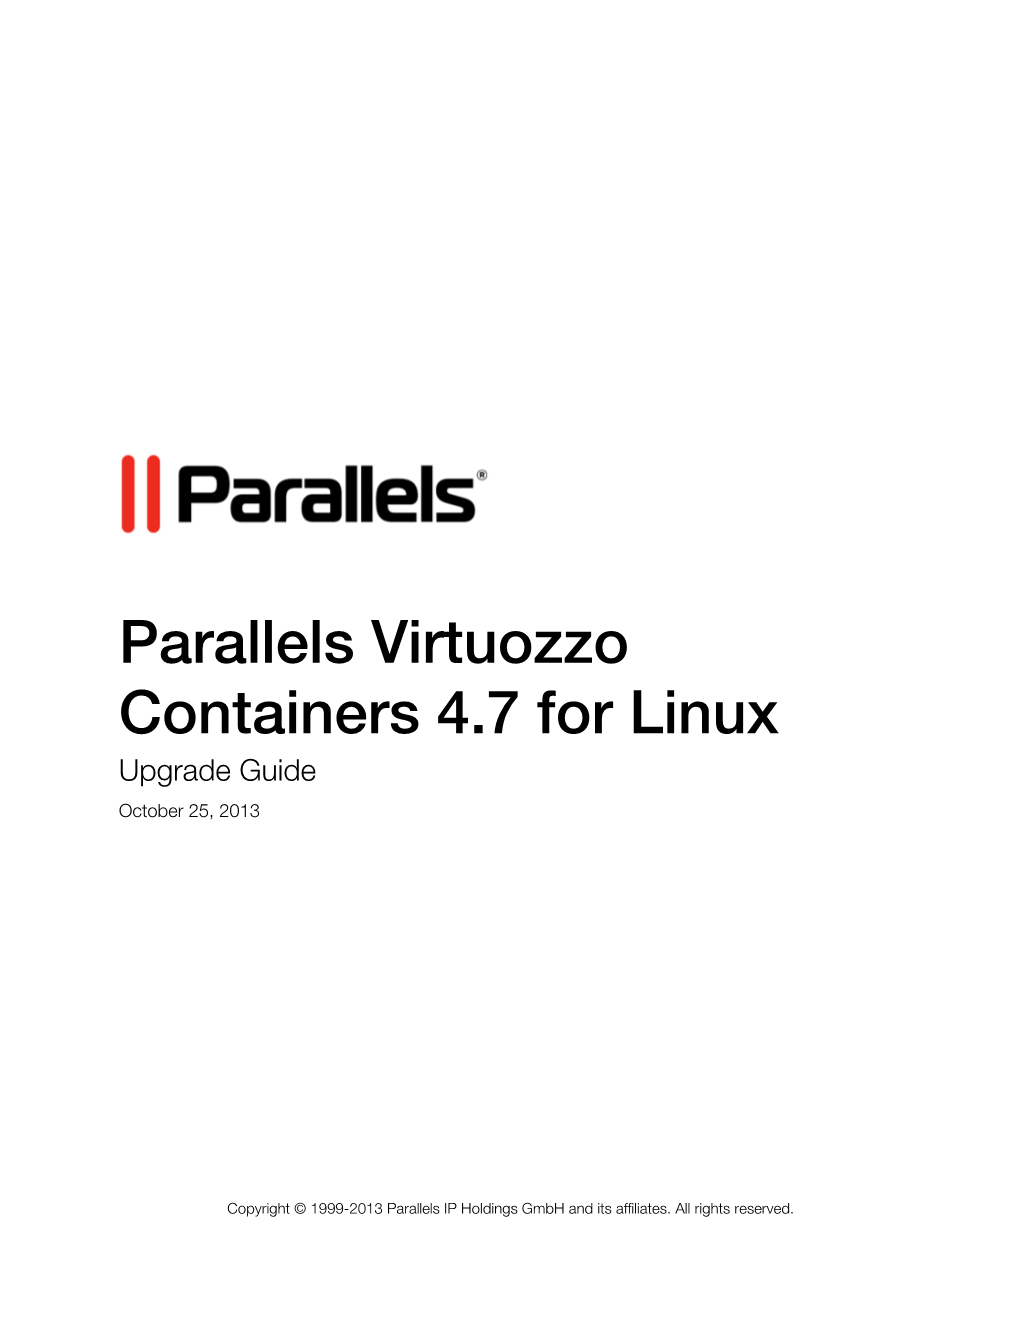 Parallels Virtuozzo Containers 4.7 for Linux Upgrade Guide October 25, 2013